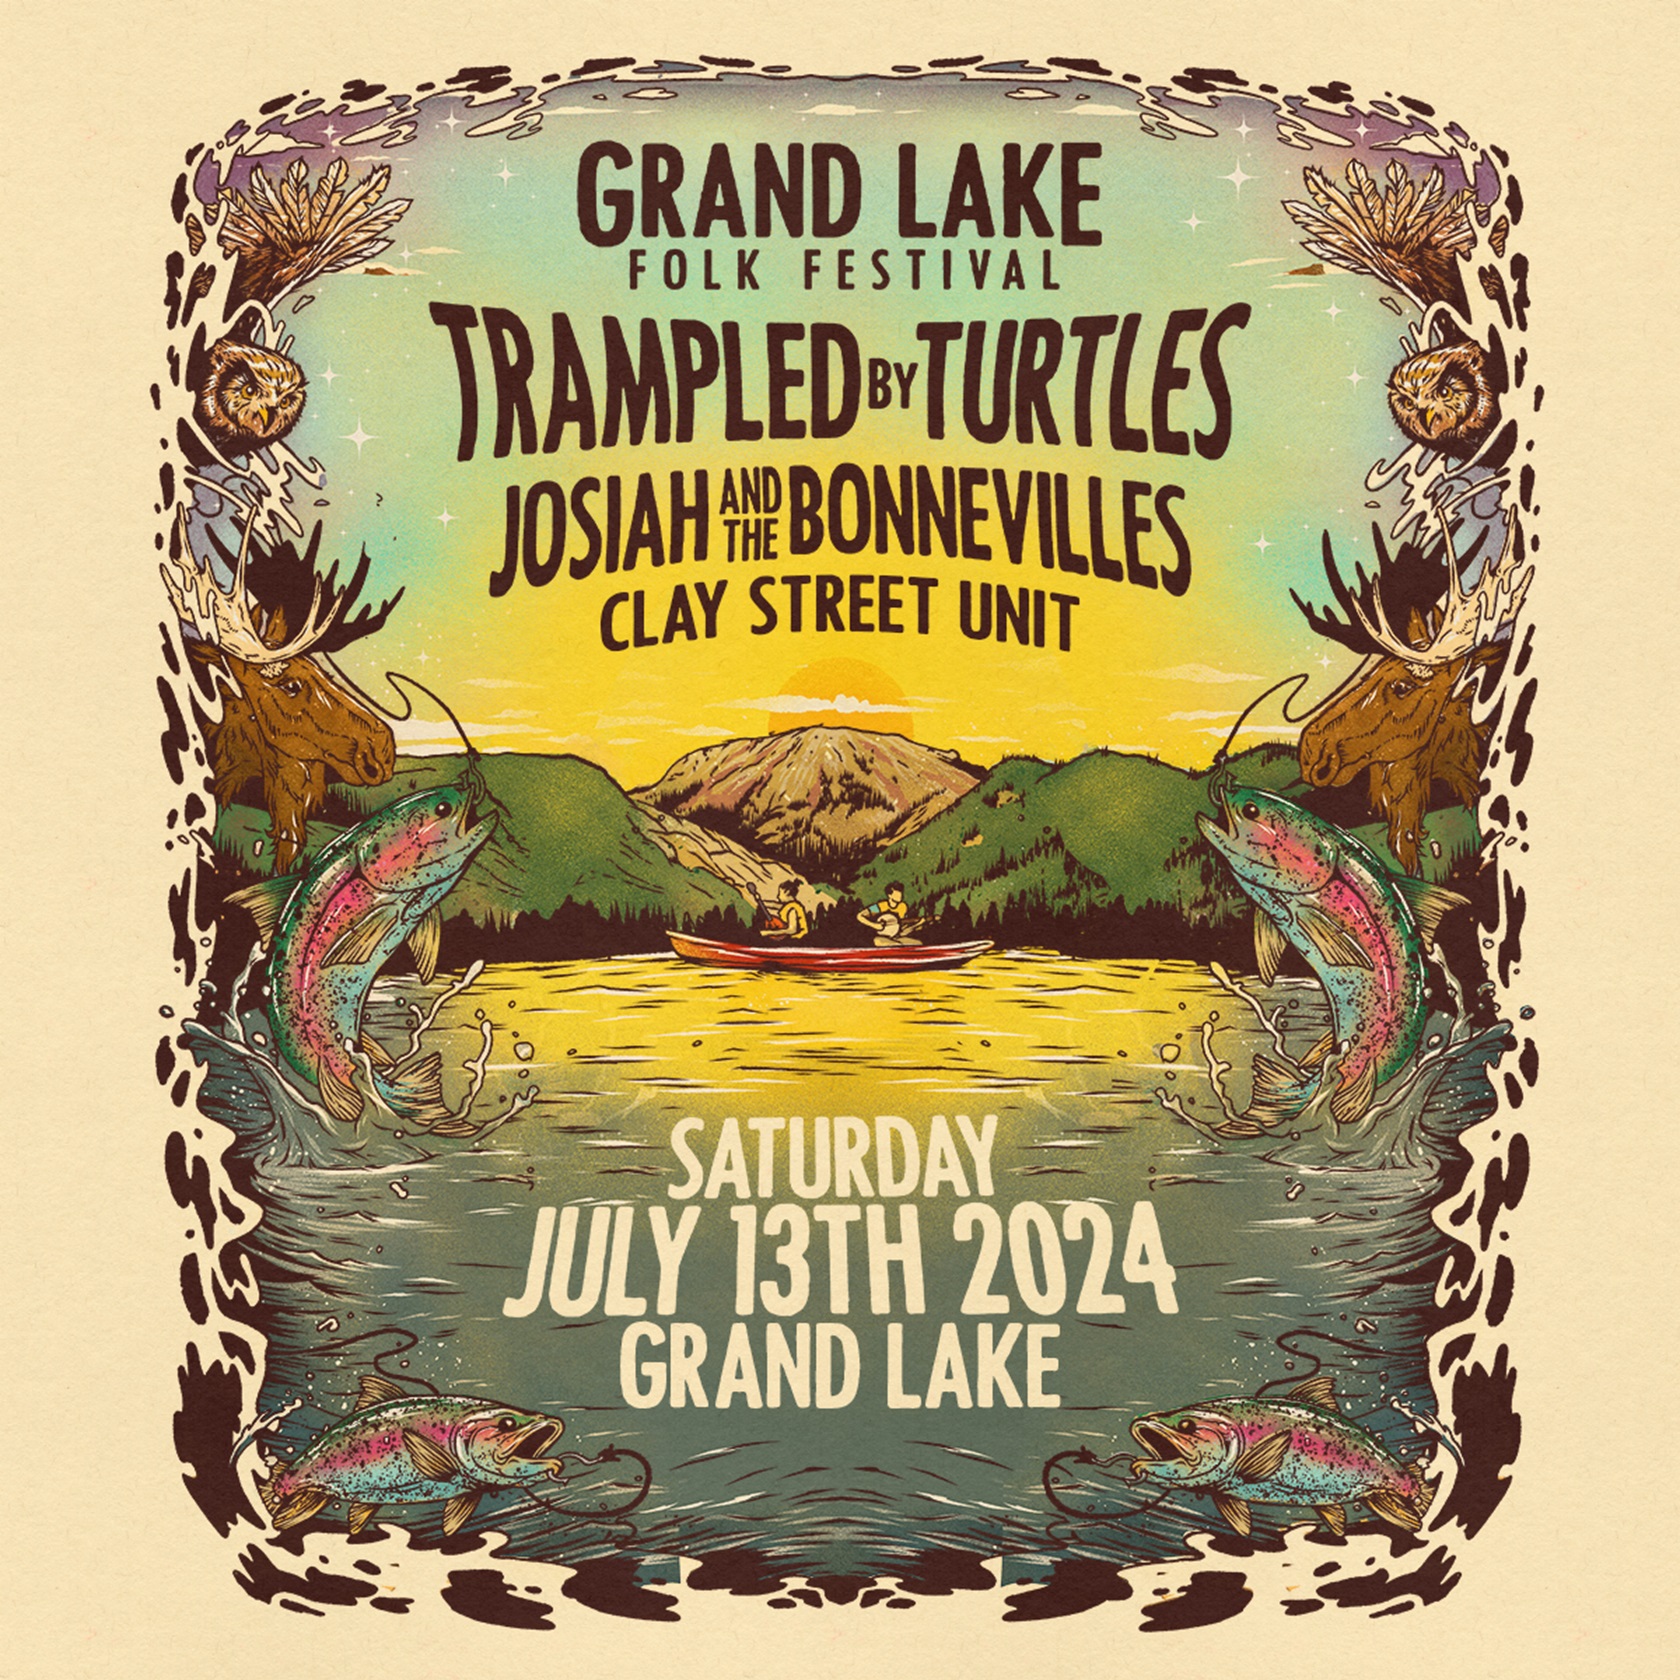 Trampled by Turtles to Headline Grand Lake Folk Festival: A Celebration of Bluegrass Tradition and Contemporary Innovation